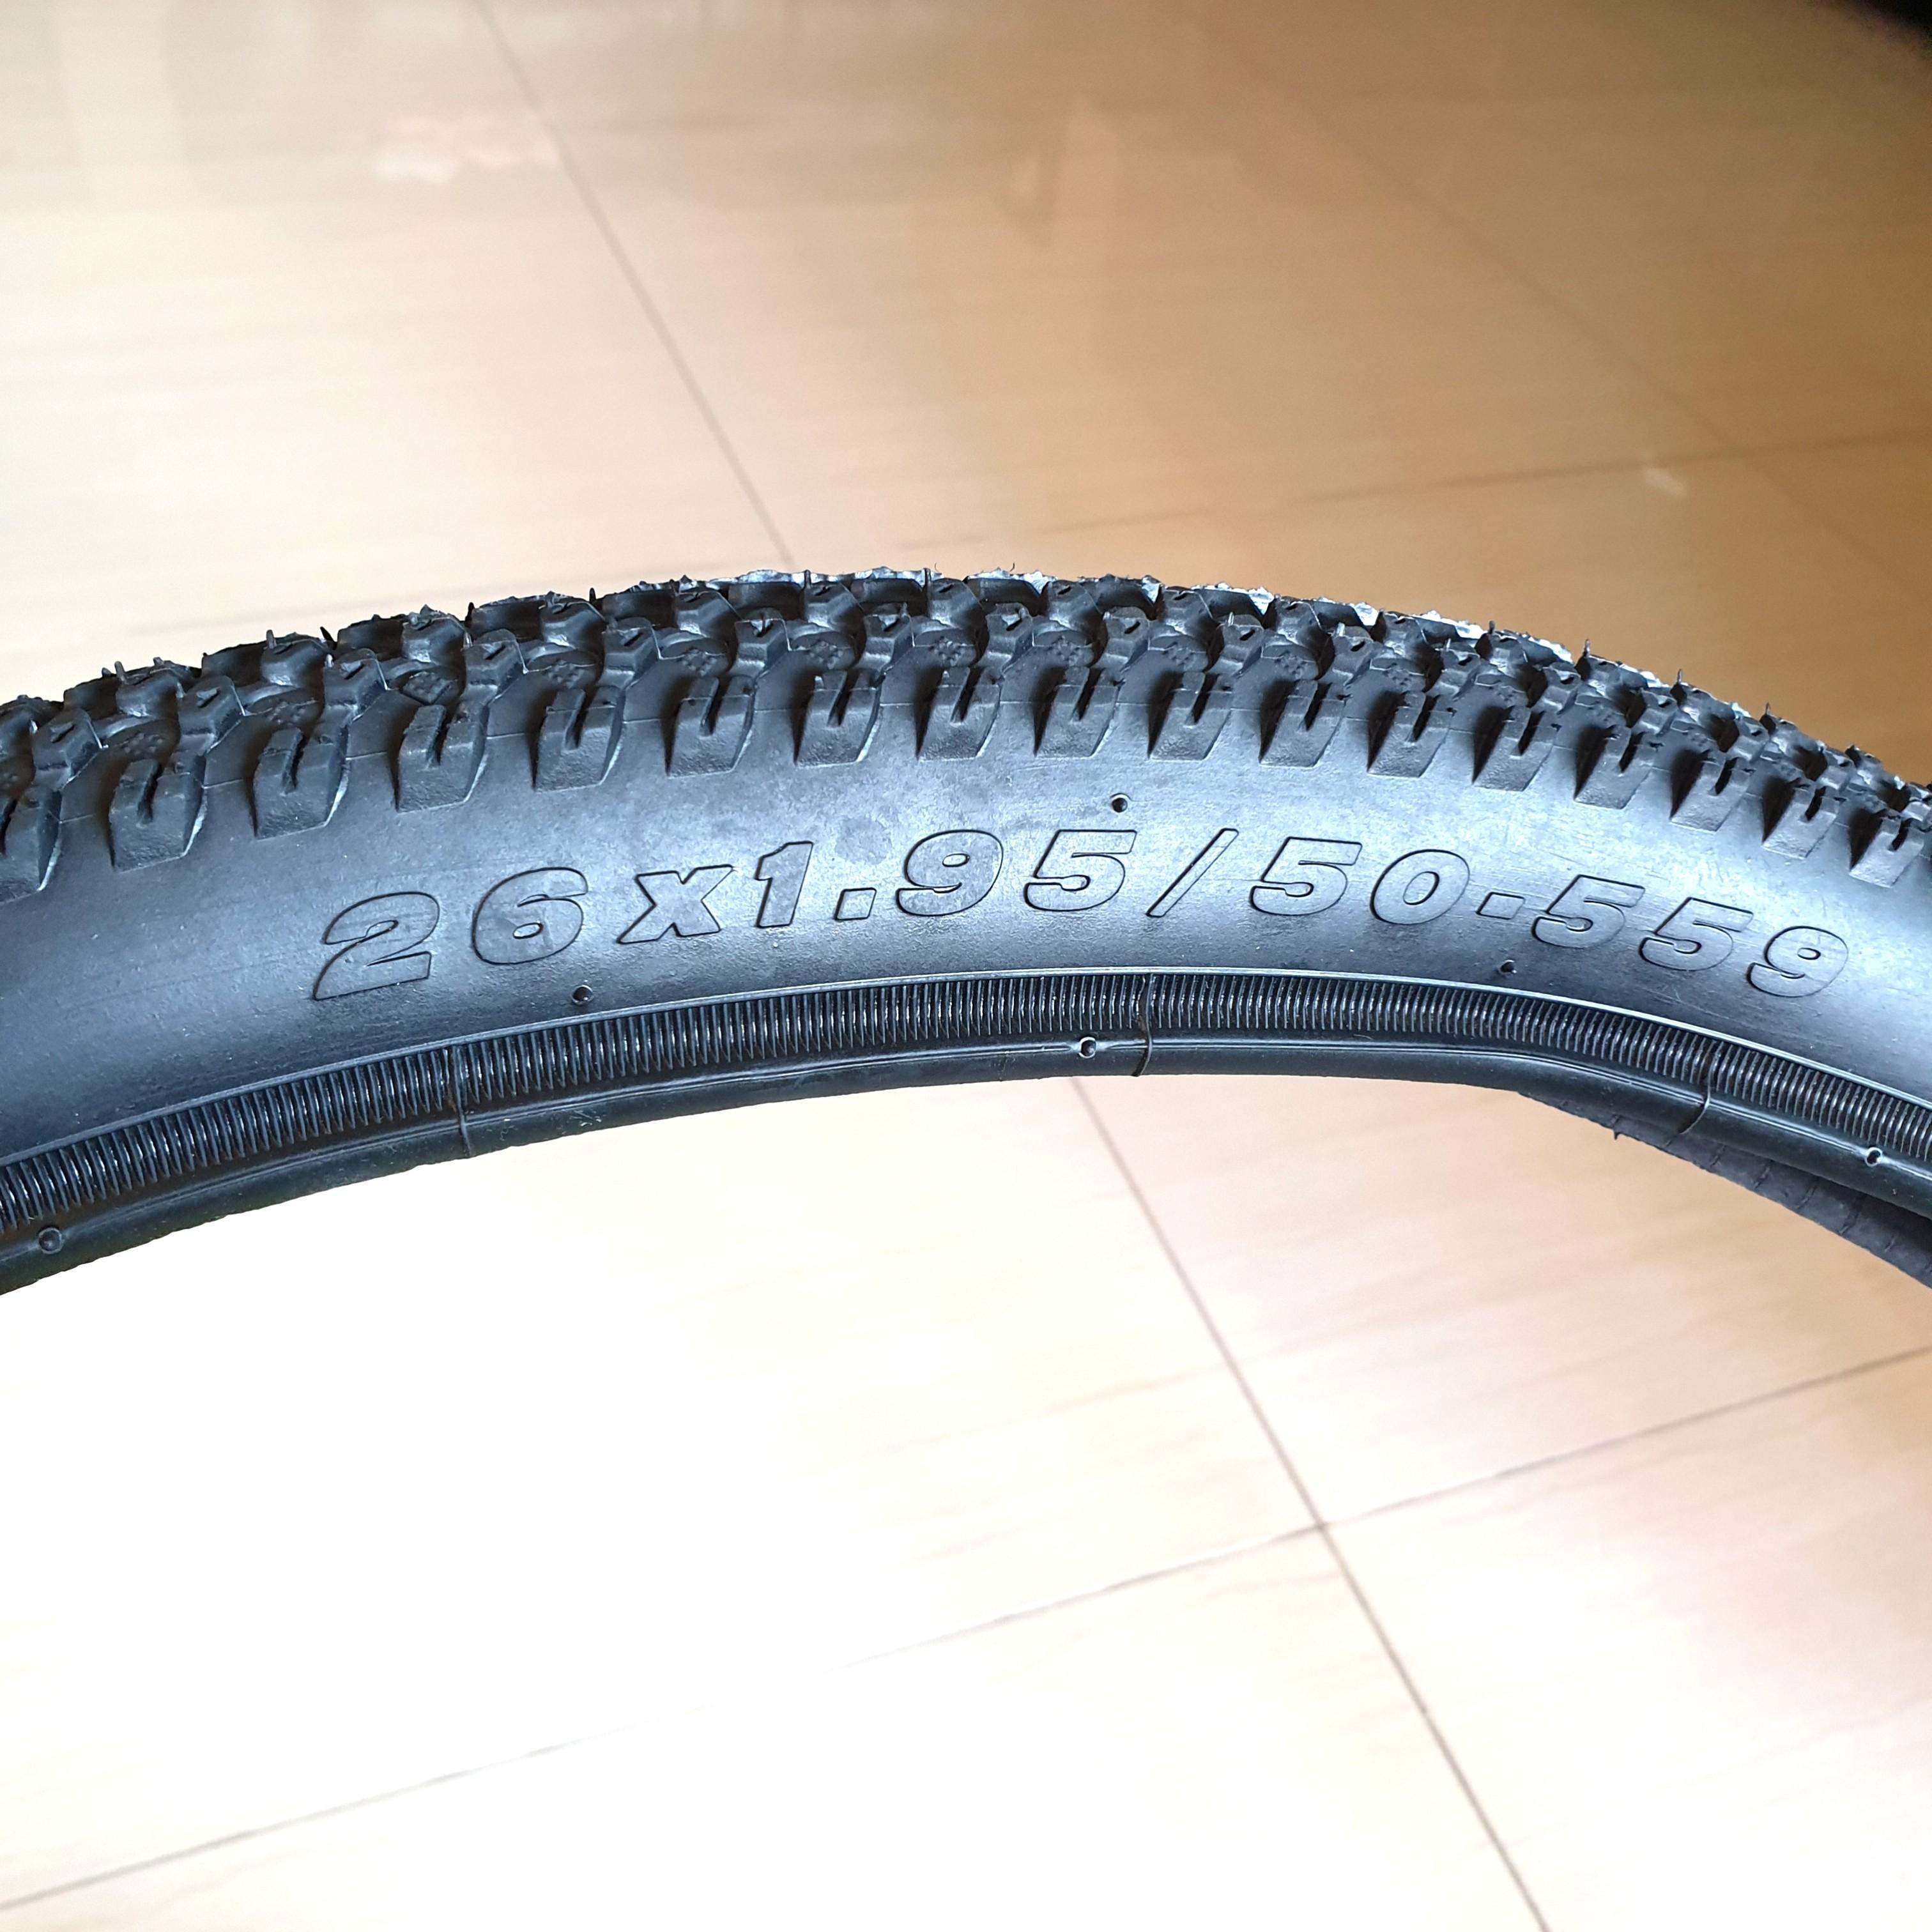 bicycle tyres and tubes